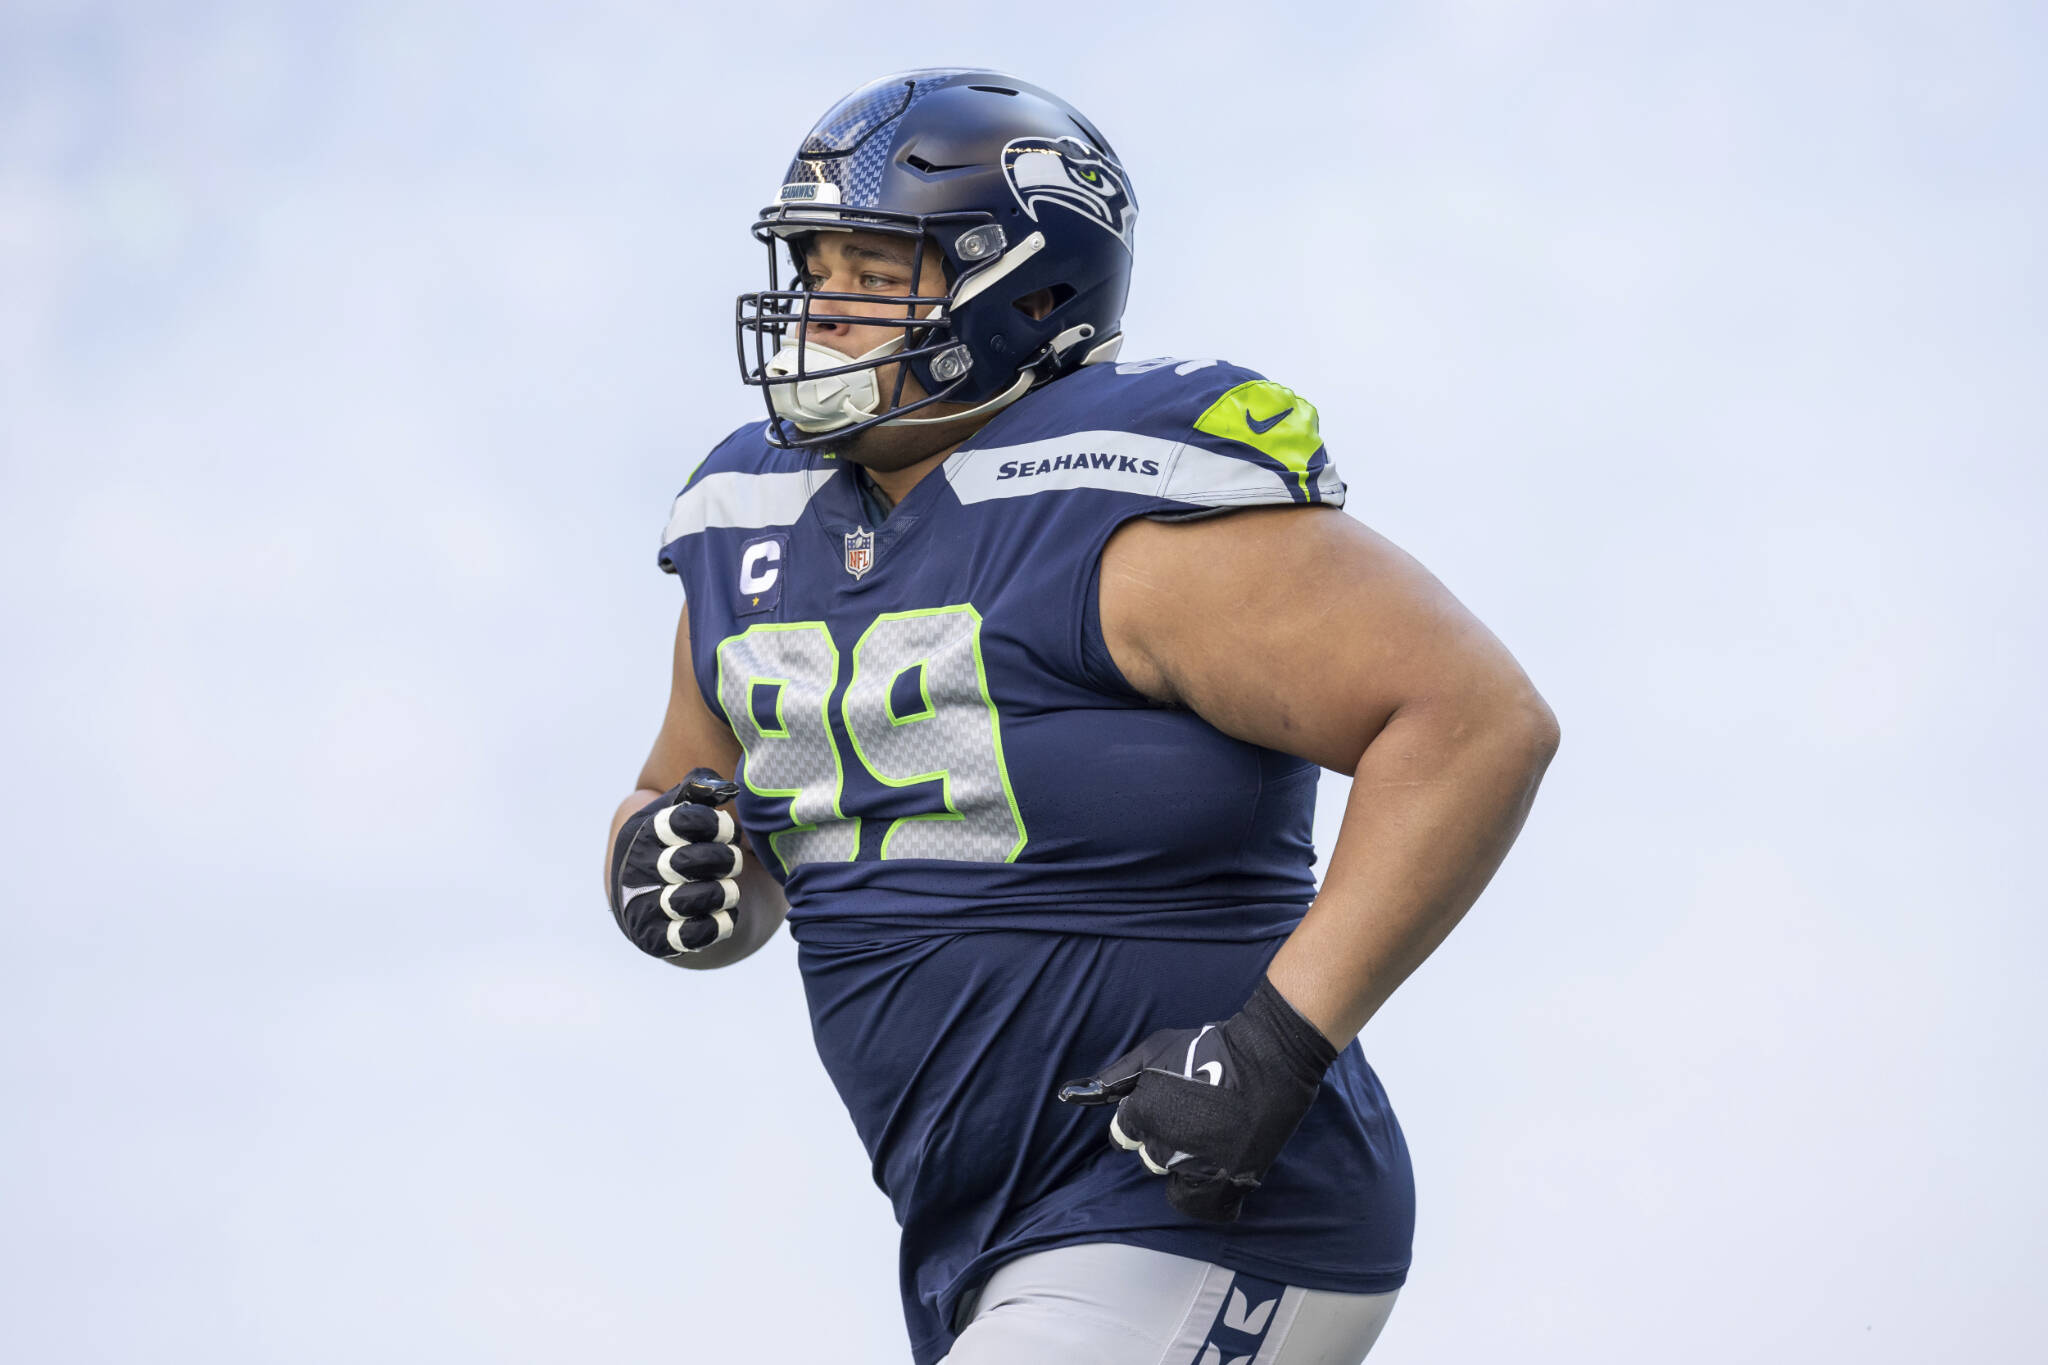 Seahawks defensive tackle Al Woods enters the field during player introductions before a game against the Jets on Jan. 1 in Seattle. (AP Photo/Jeff Lewis)